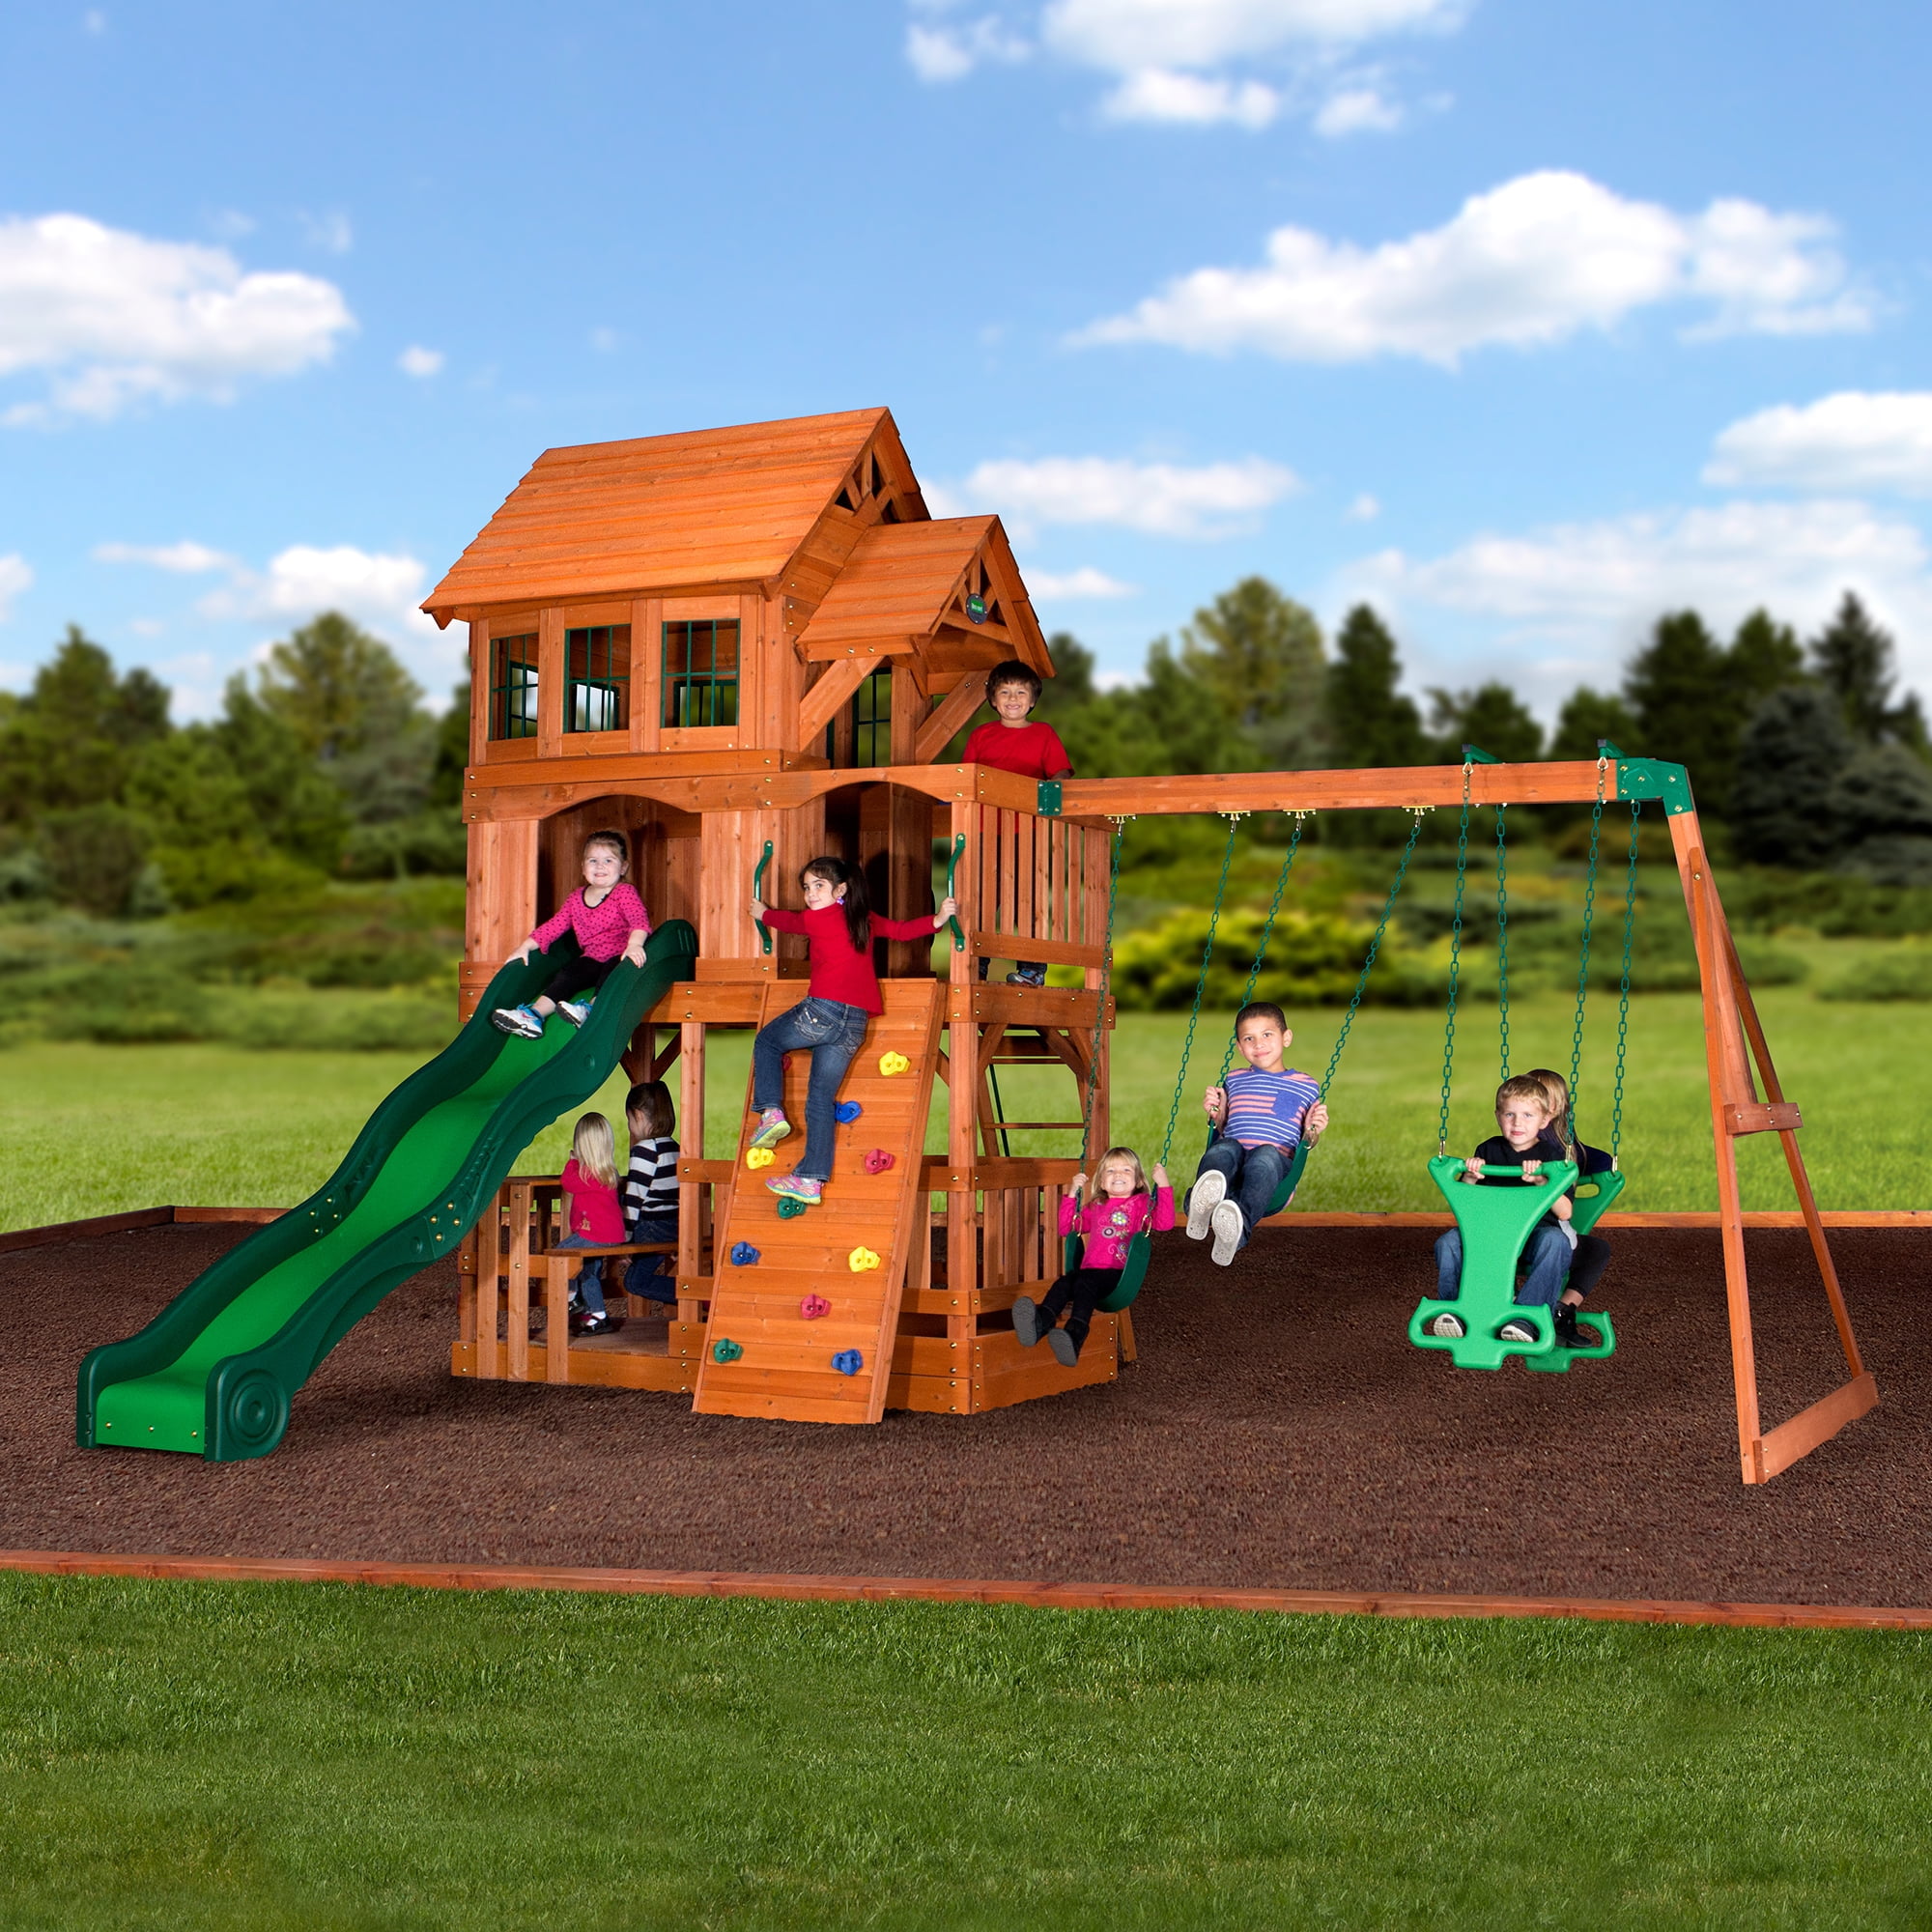 View Backyard Discovery Playsets Pics - HomeLooker